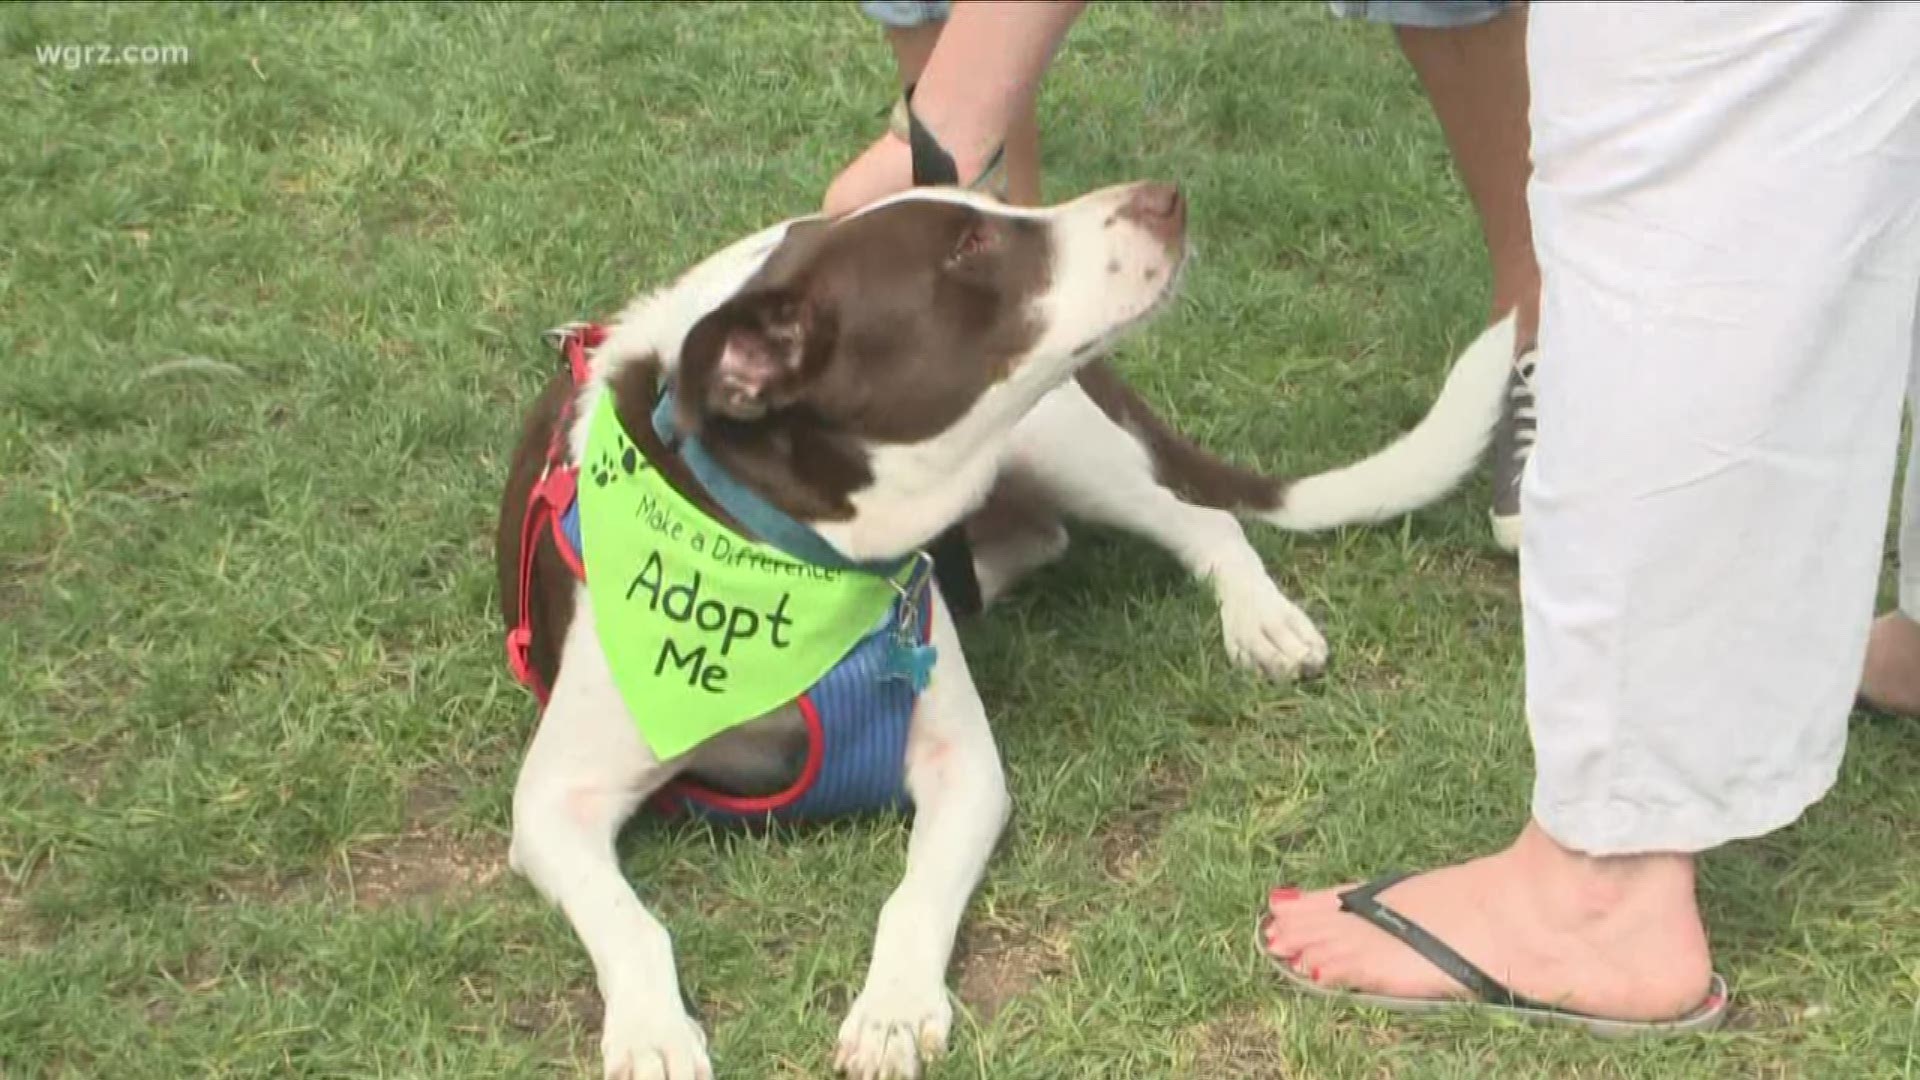 The pet adoption event runs from noon to 4 p.m. in Lancaster.